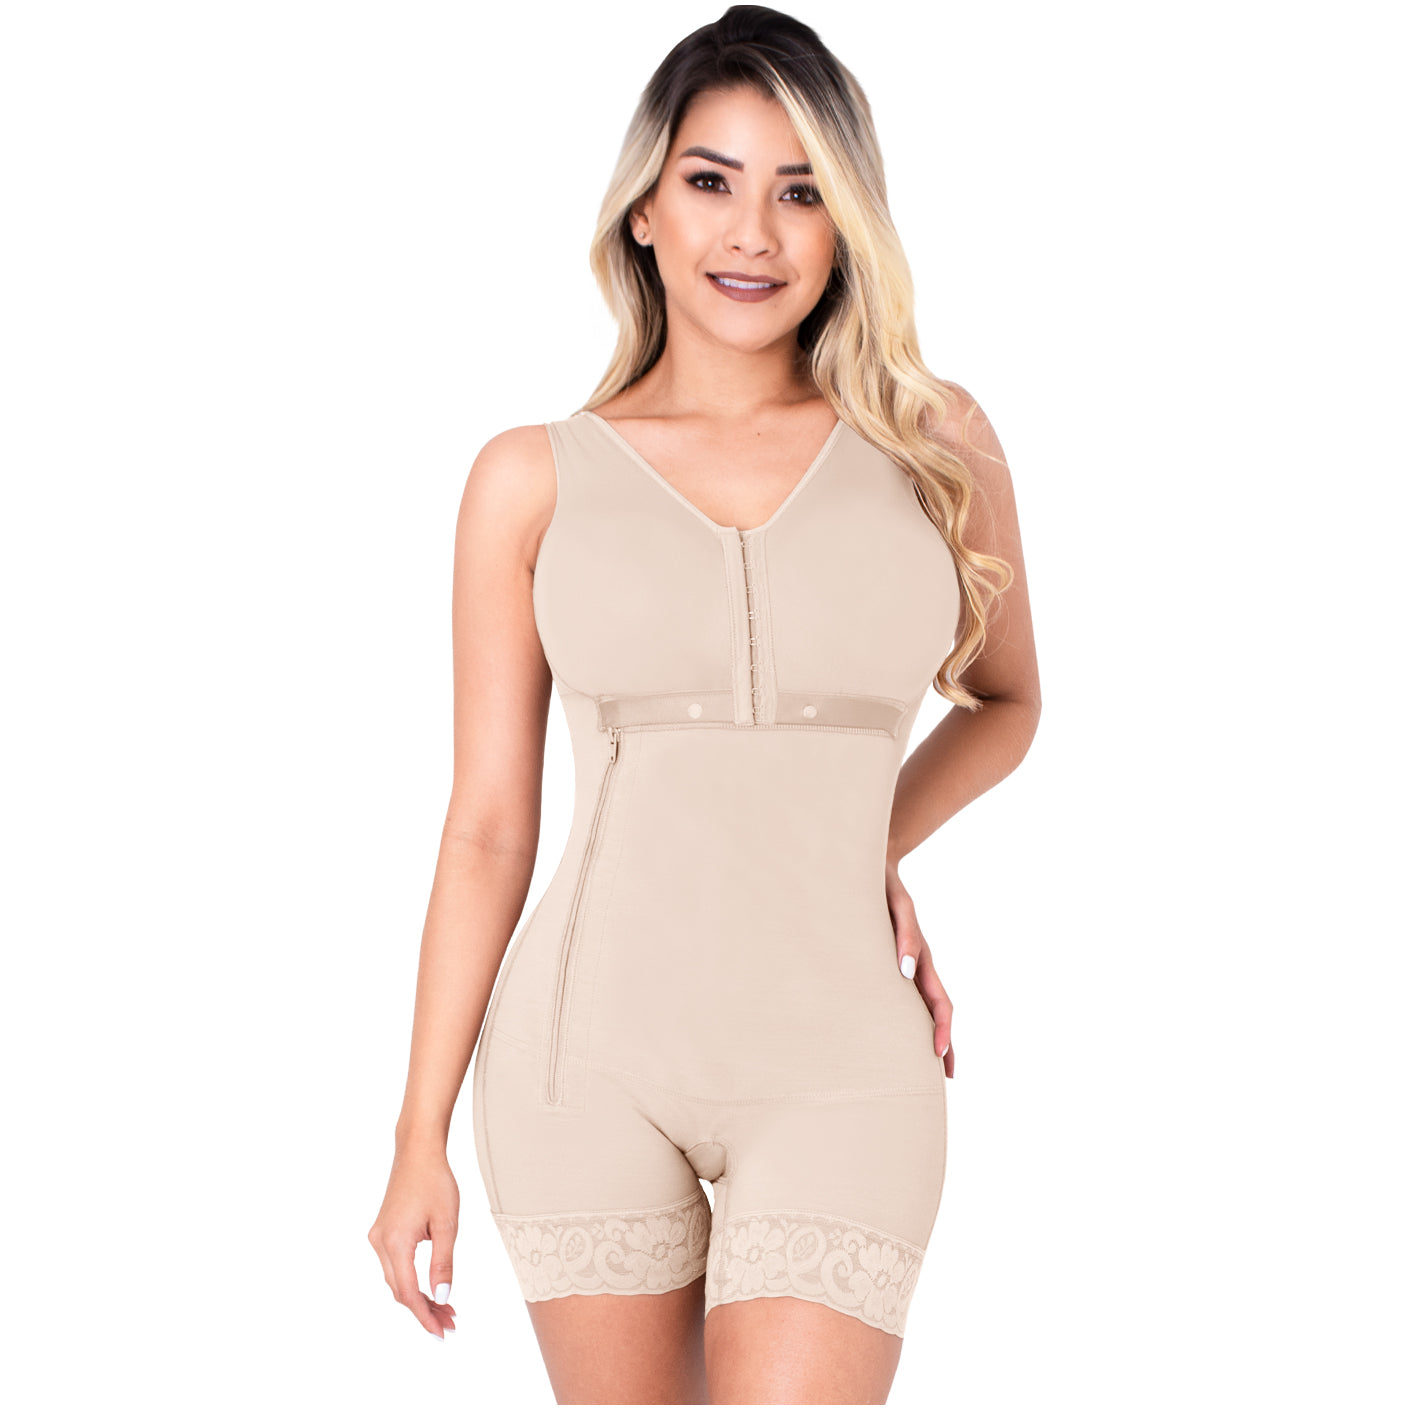 Sonryse Shapewear: 010 - Colombian Faja Knee Lenght with Built-in